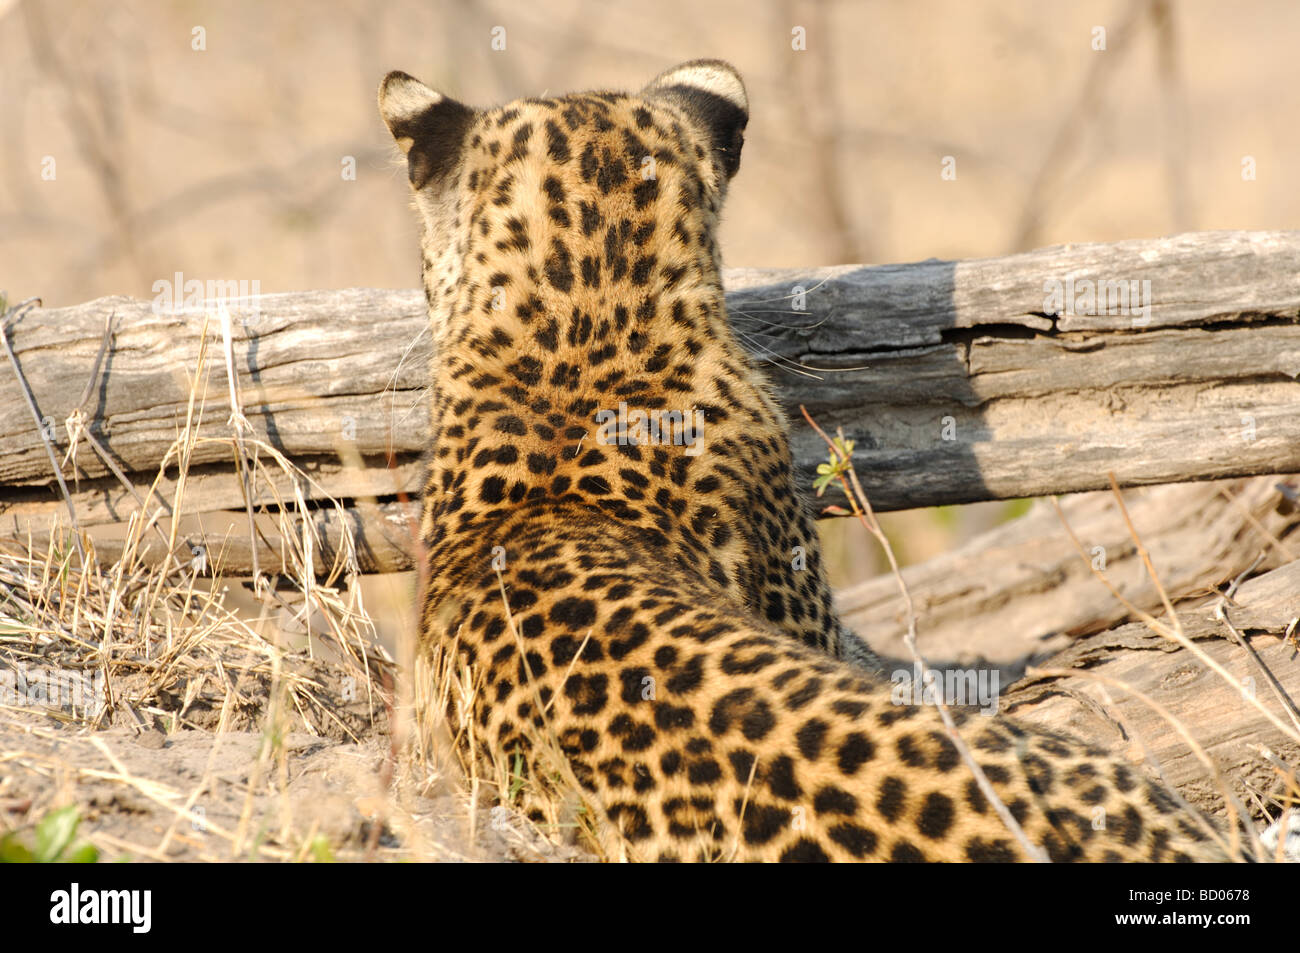 Stock photo of a leopard peering over a log, Linyanti, Botswana, 2007. Stock Photo